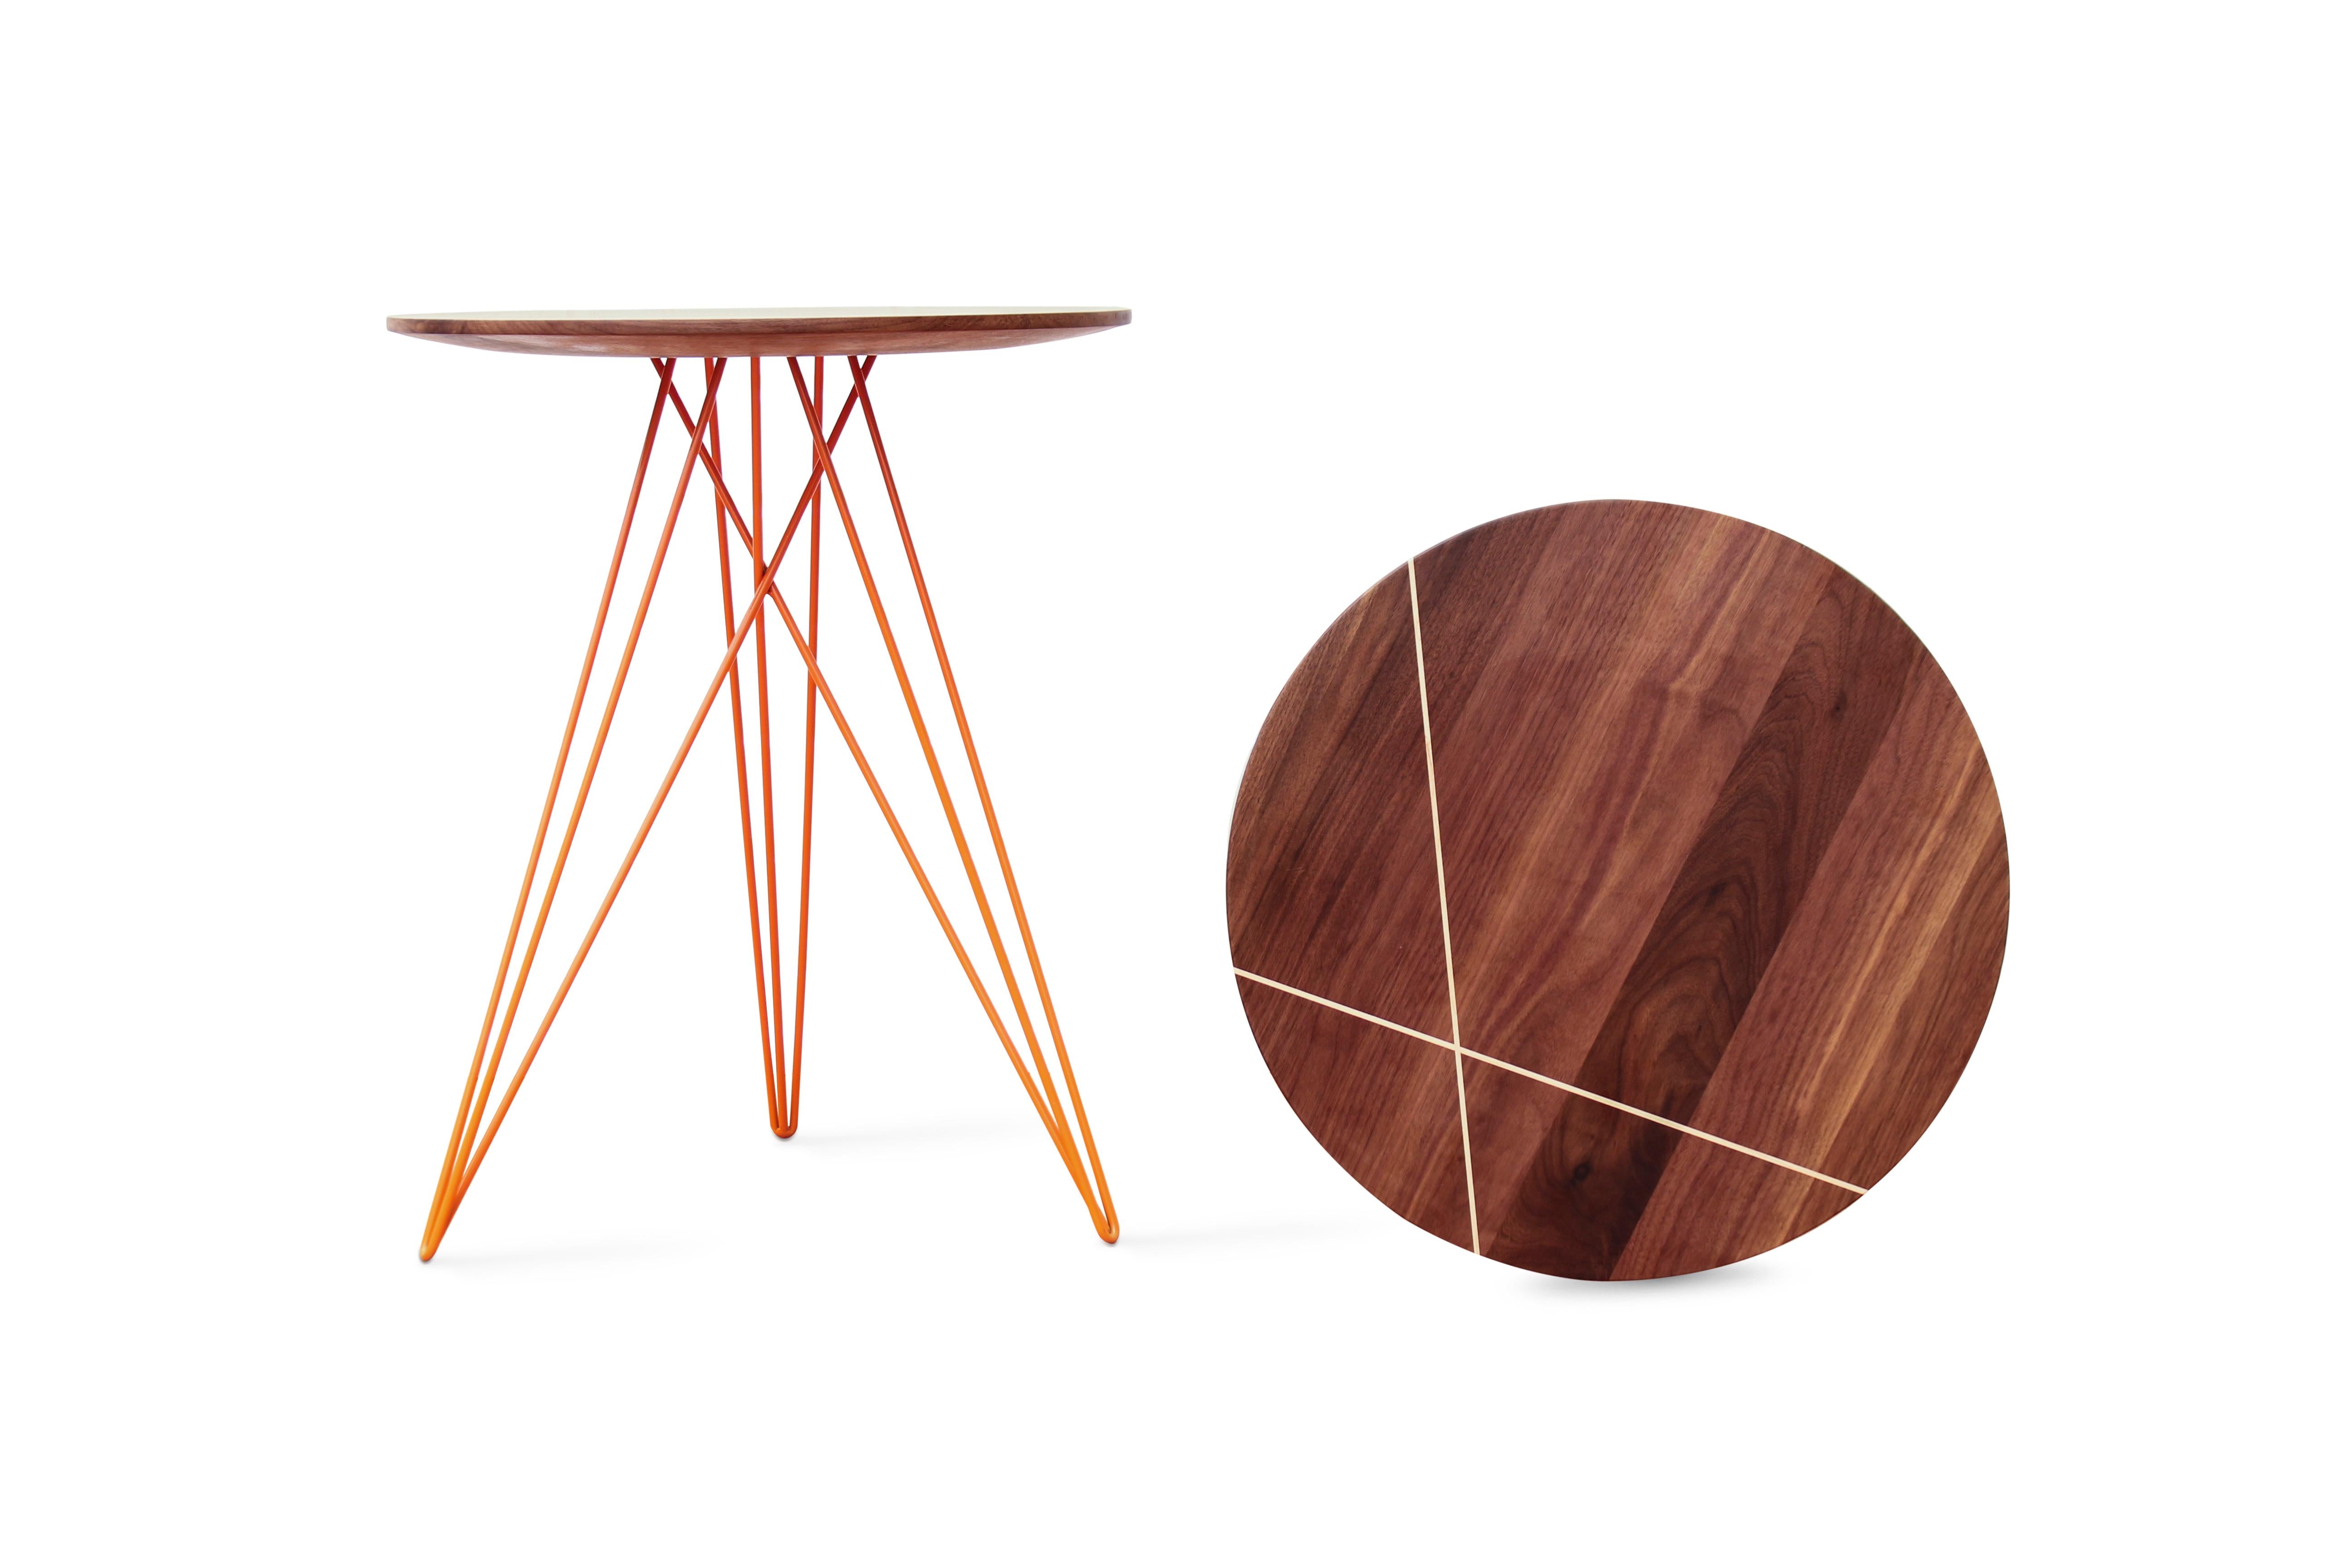 This eye-catching piece combines an industrial structure with sophisticated modern accents. The intersecting metal legs almost seem to play tricks on the eyes and change shape as you circle around the table. It is finished with a slim and elegantly